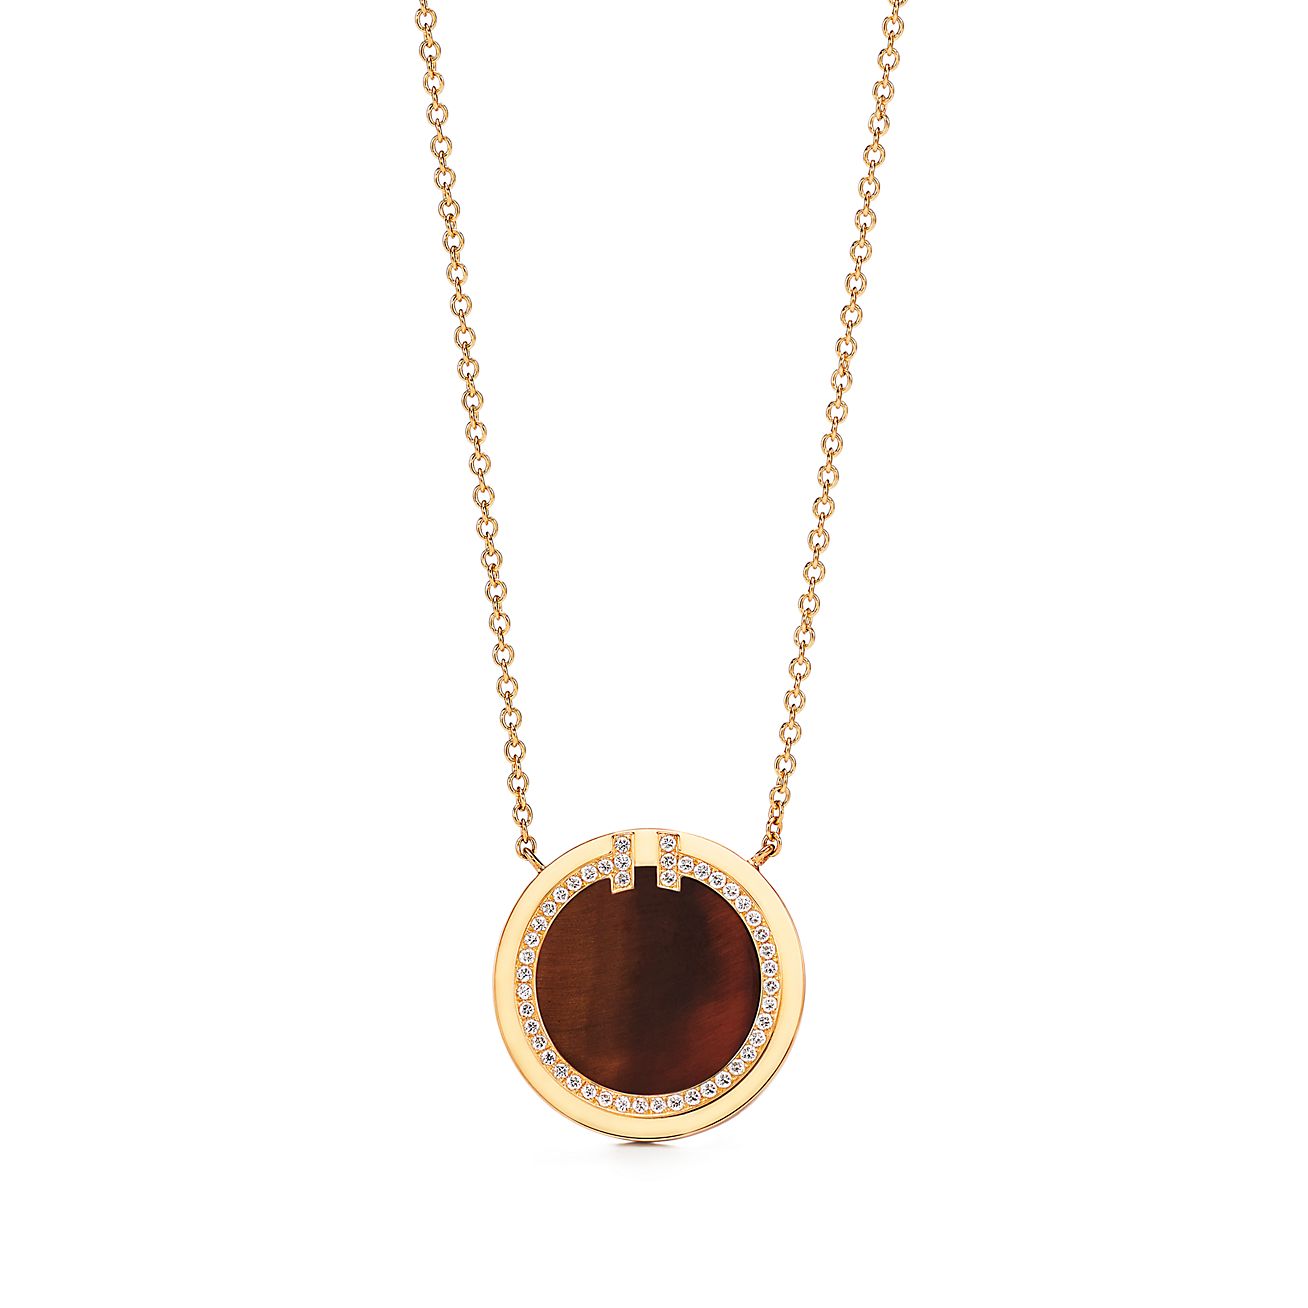 tigers eye necklace pendant